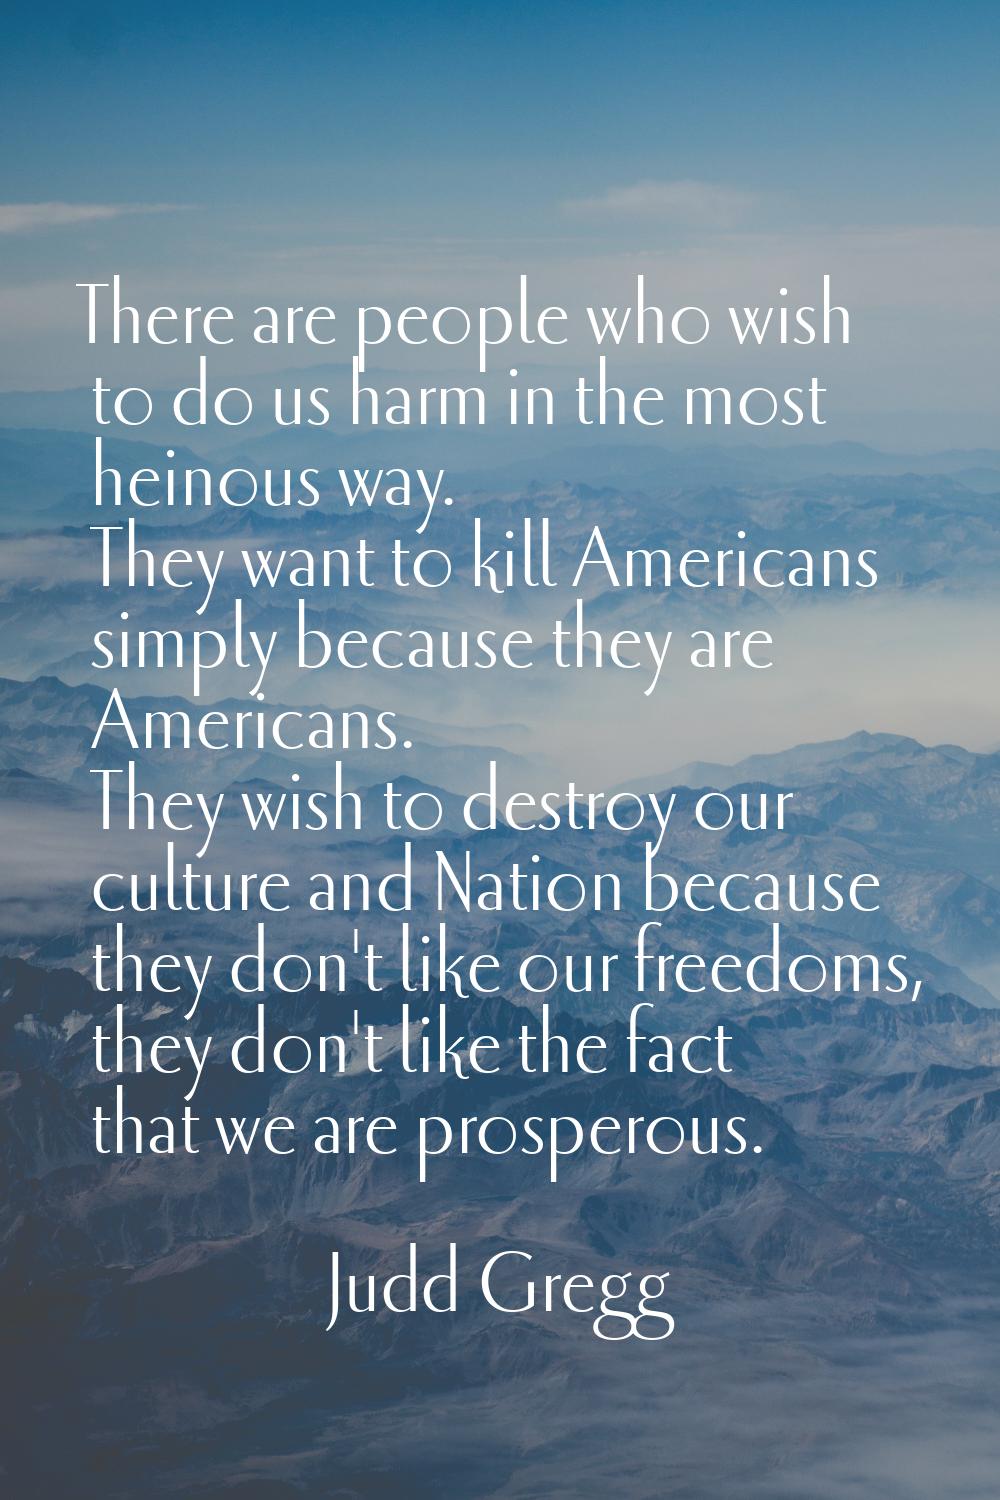 There are people who wish to do us harm in the most heinous way. They want to kill Americans simply